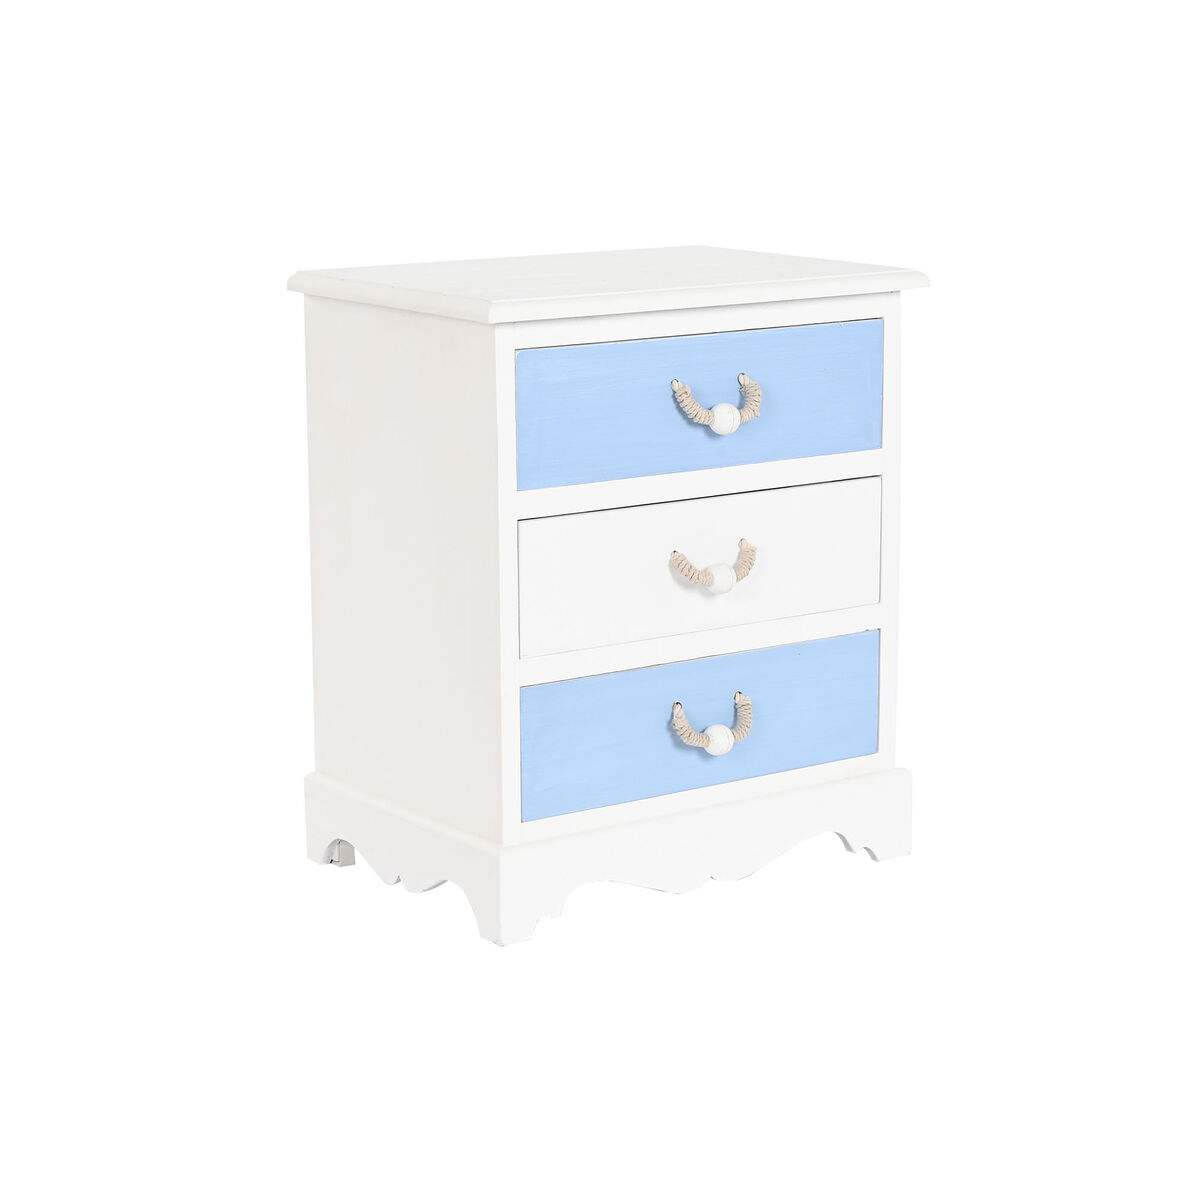 Nightstand DKD Home Decor 50 x 35 x 58 cm Rope White Sky blue Navy Blue MDF Wood